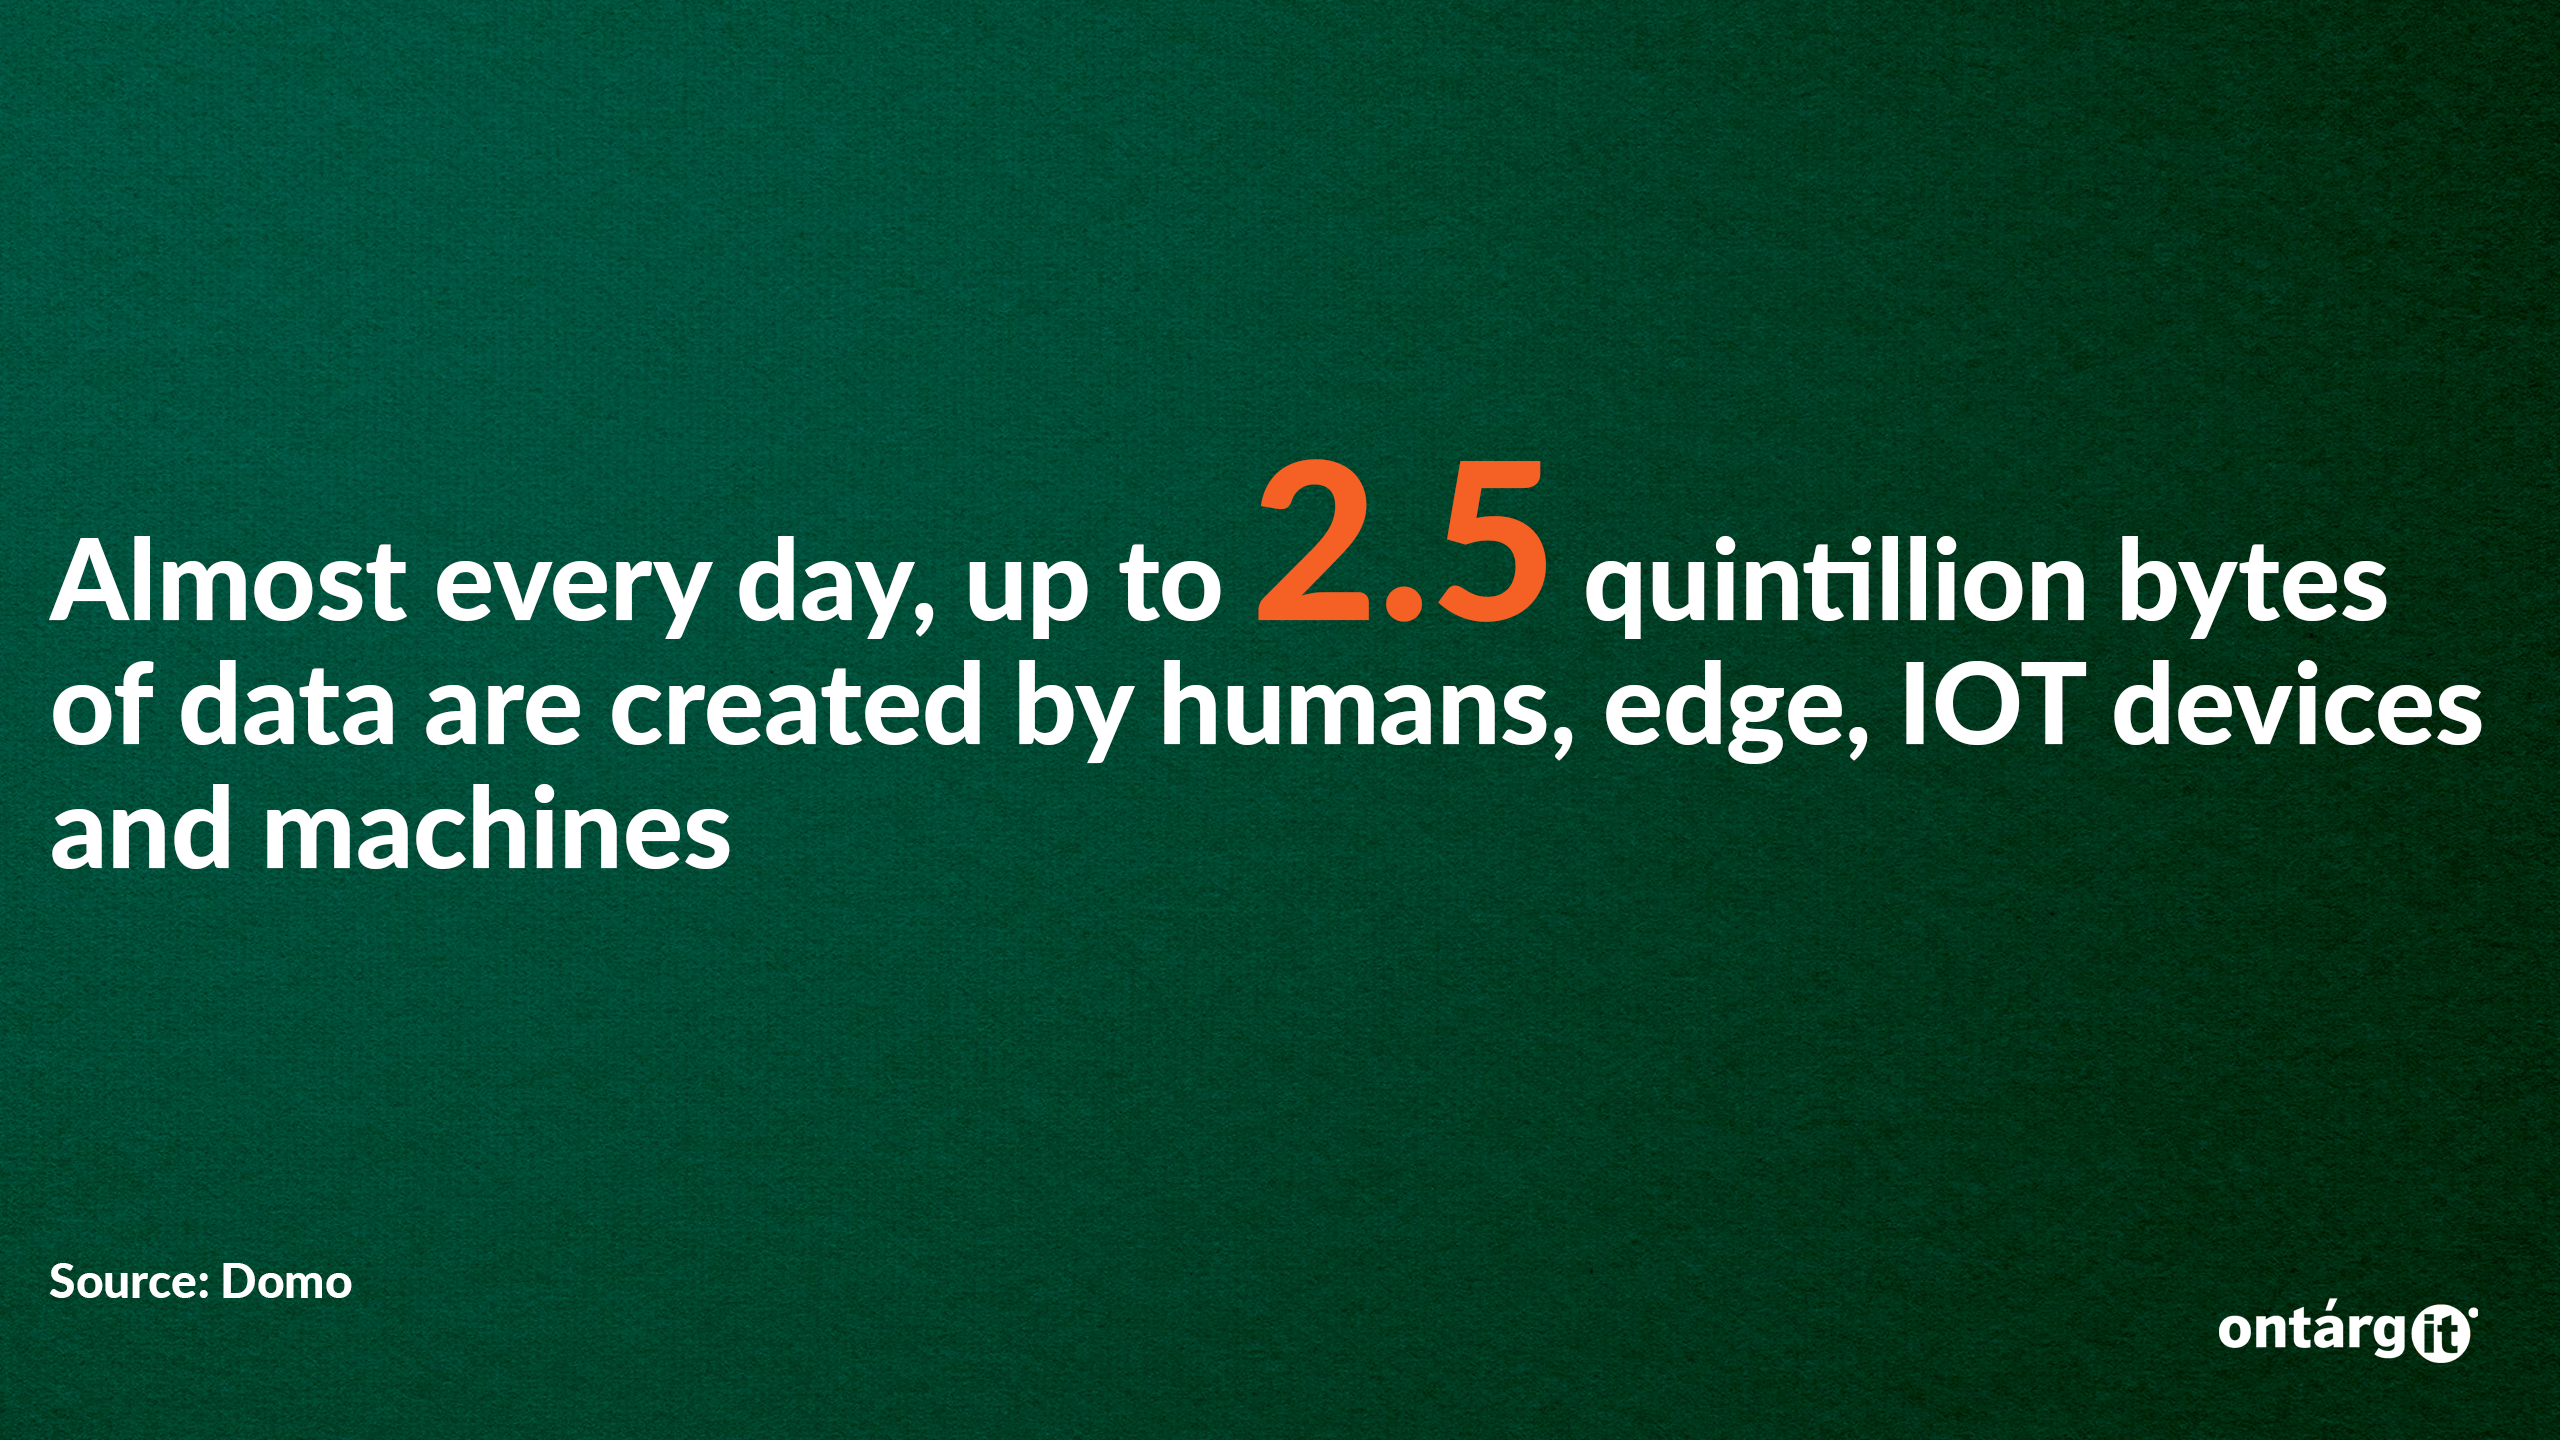 Almost every day, up to 2.5 quintillion bytes of data are created by humans, edge, IOT devices and machines.